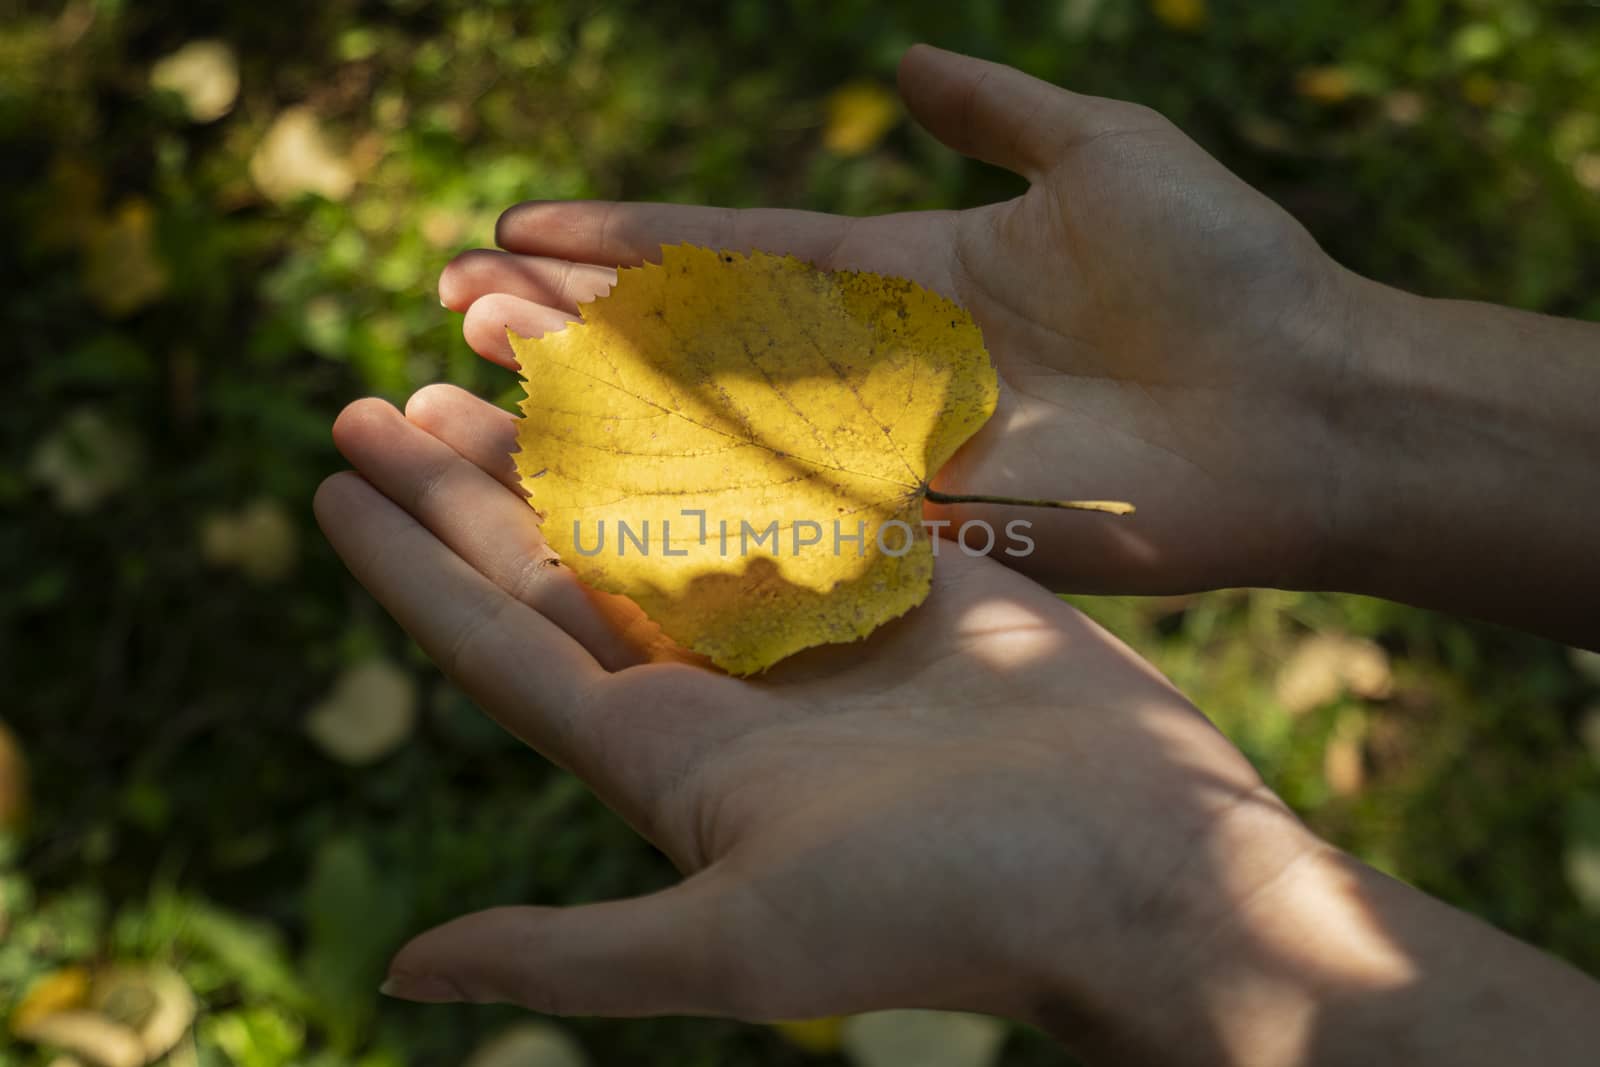 a leaf on a female hand in autumn